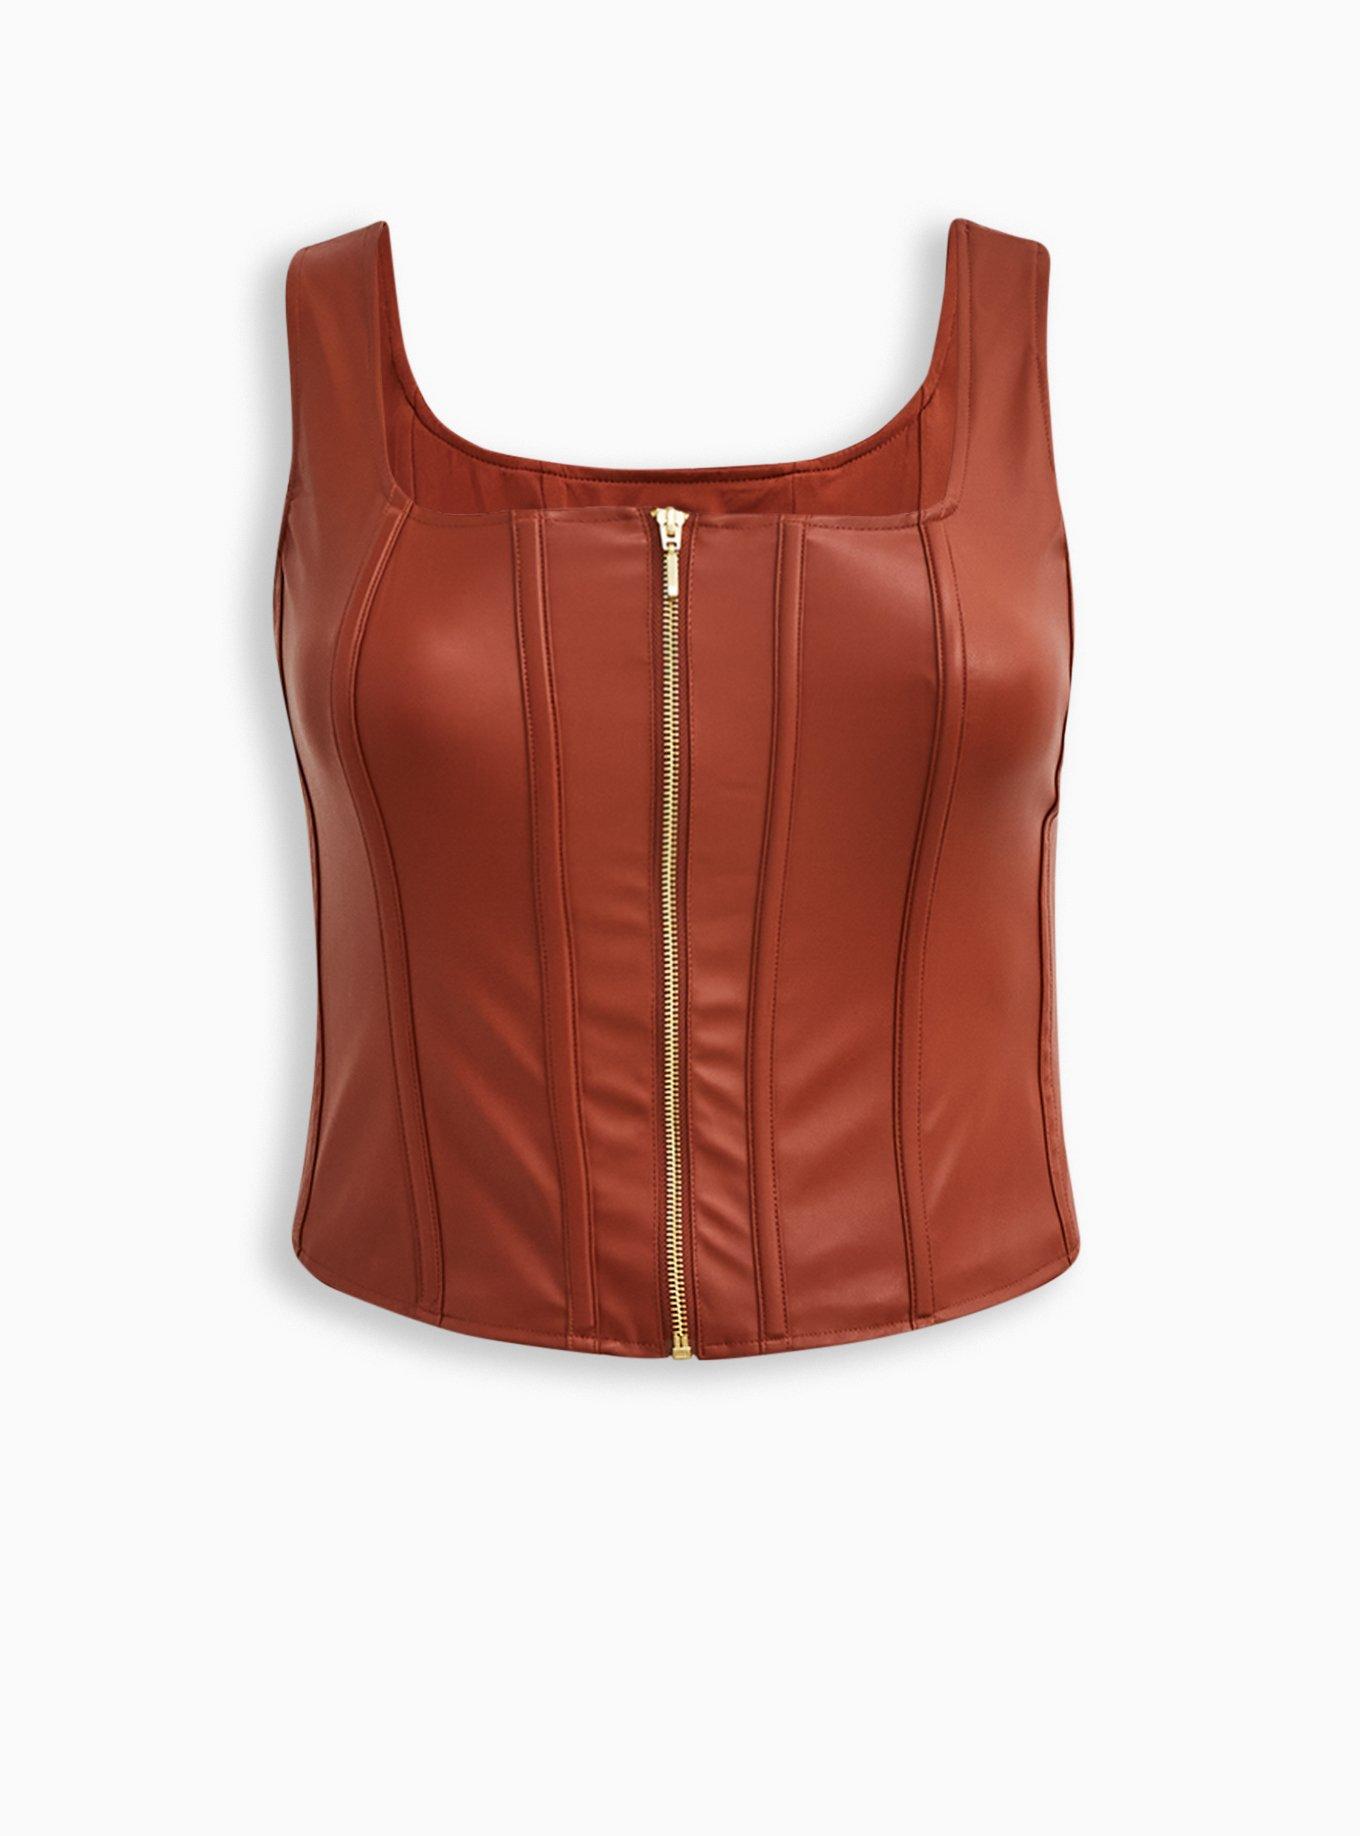 6 Buckle Zip Front Corset in Brown Leather VC1318R - Open Road